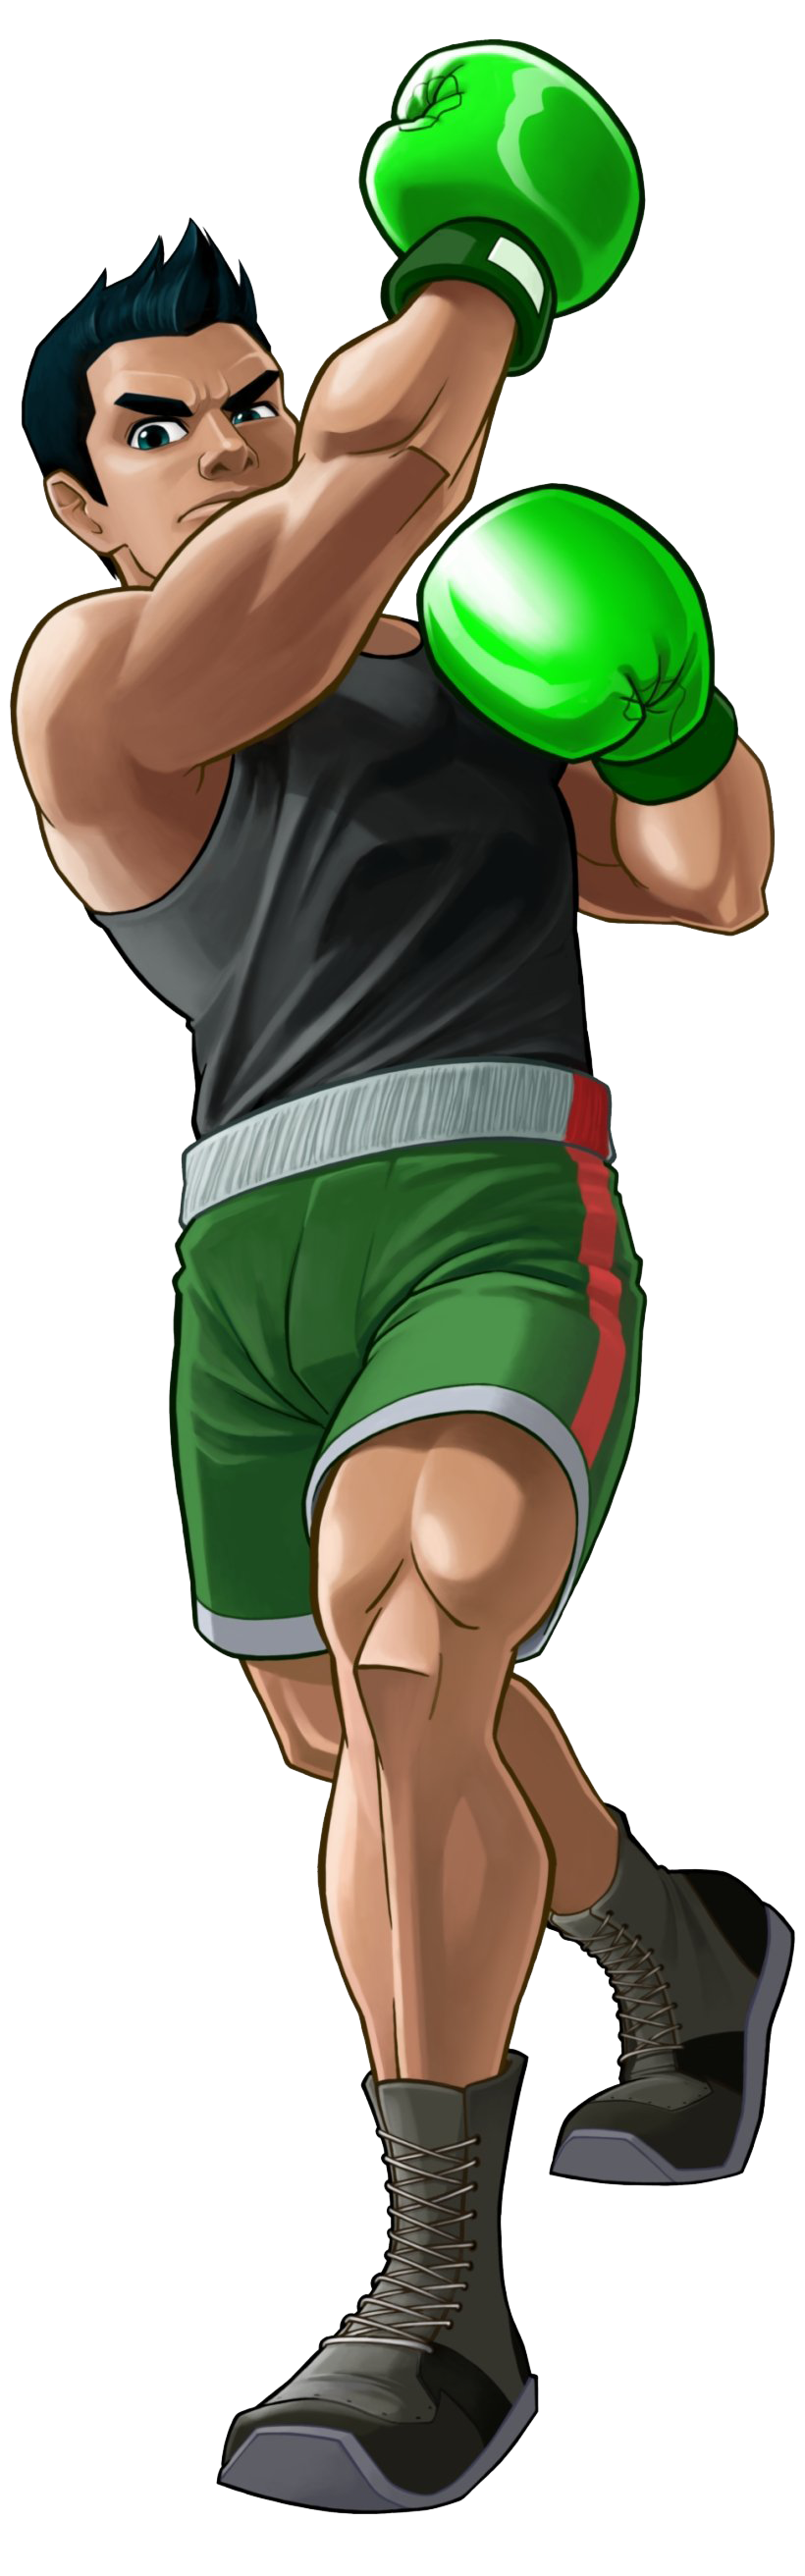 Little Mac Download Free Image PNG Image